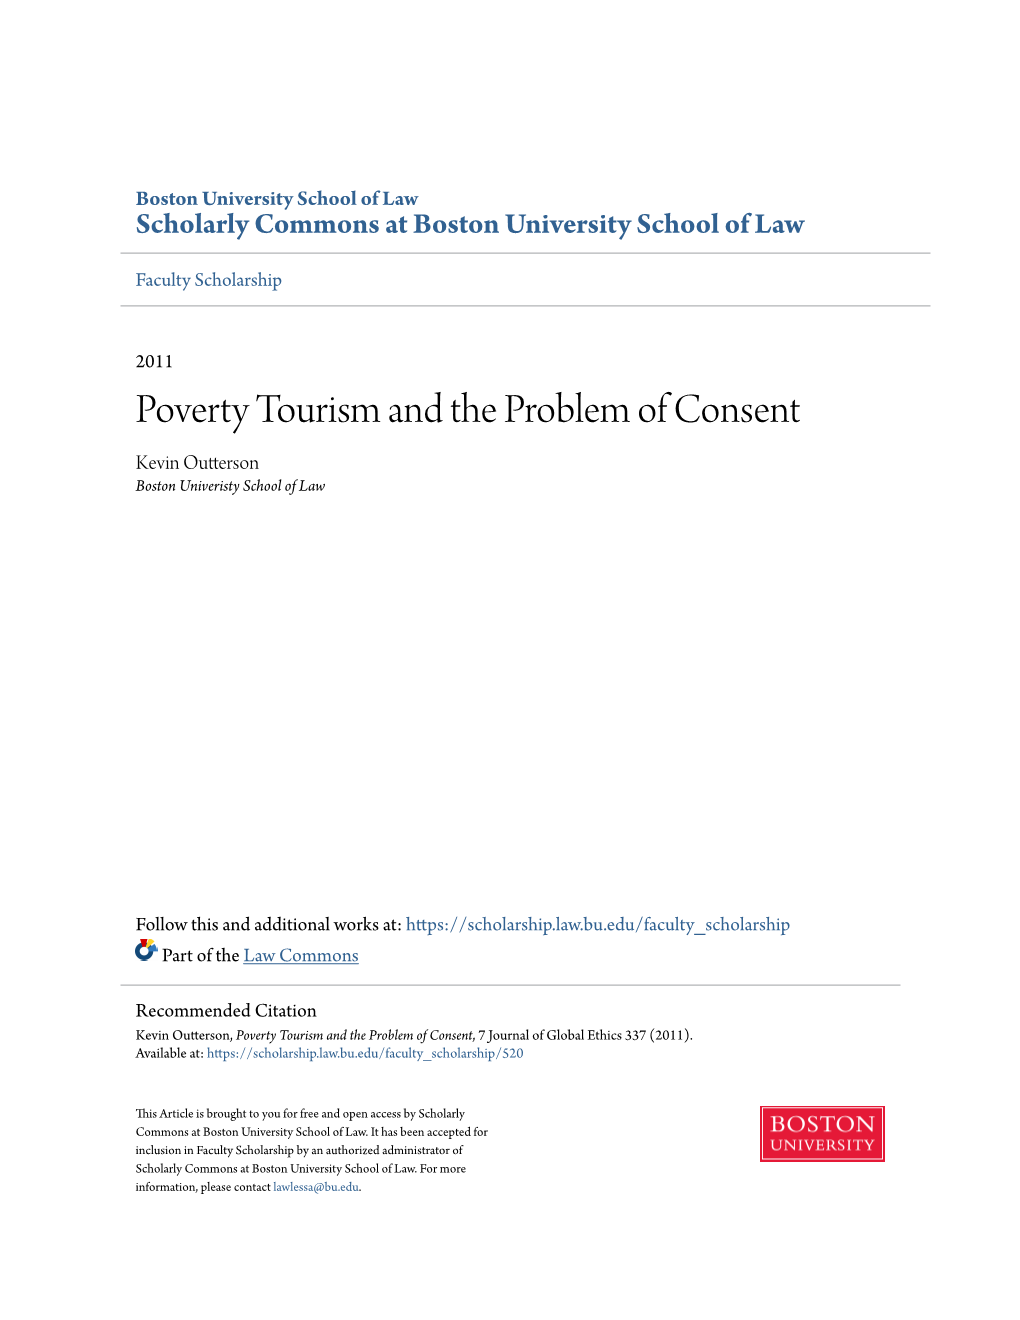 Poverty Tourism and the Problem of Consent Kevin Outterson Boston Univeristy School of Law